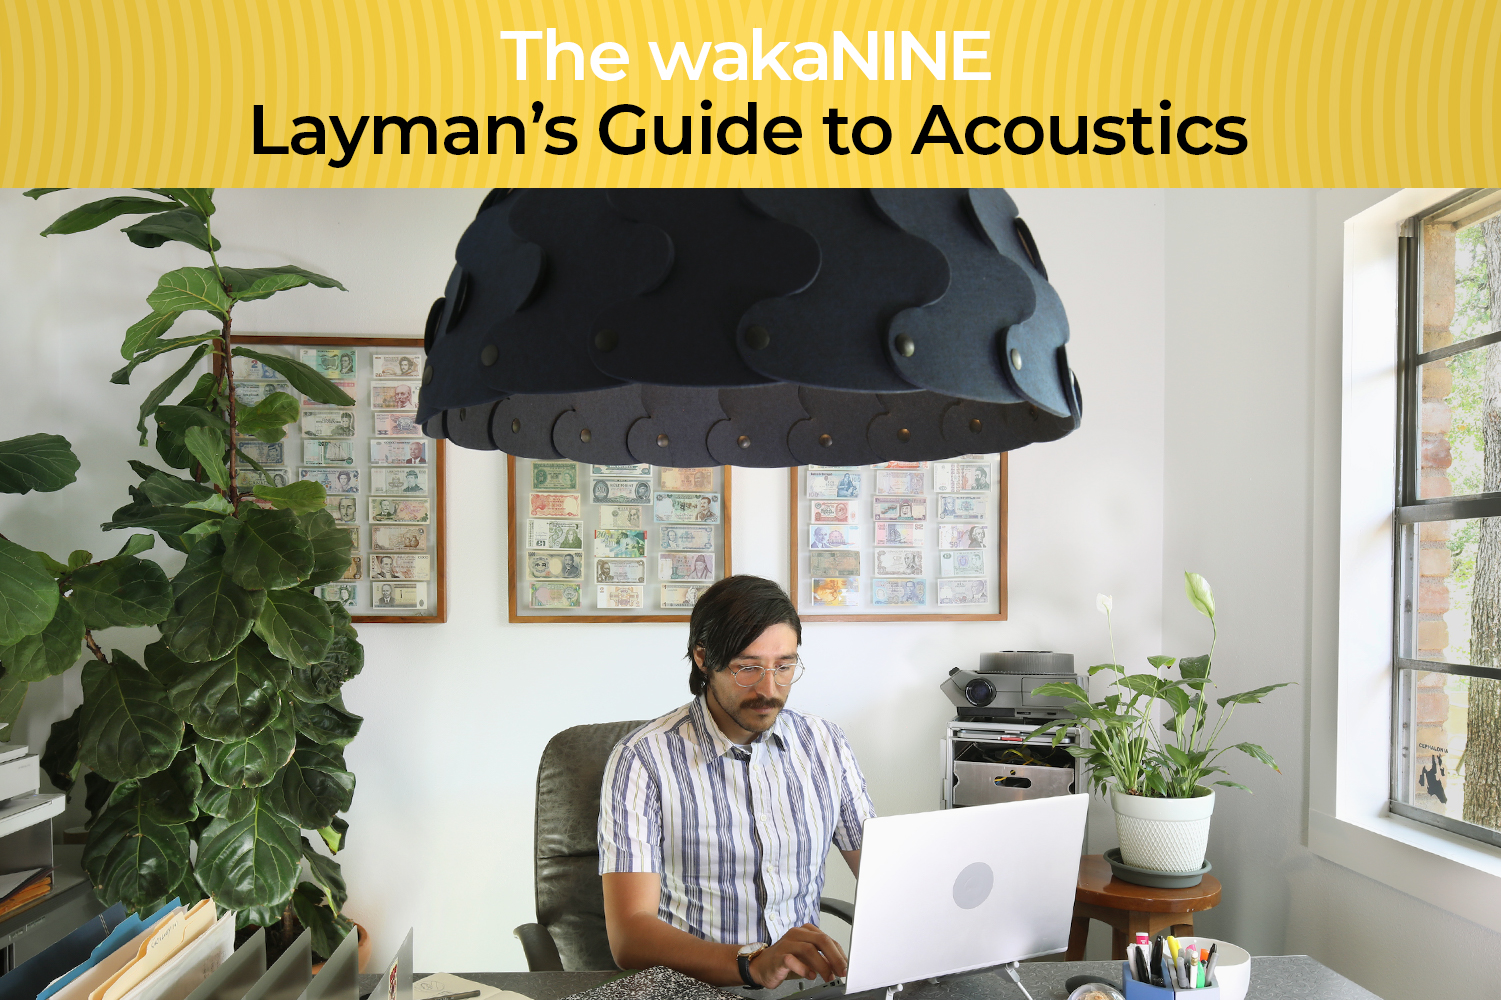 The Layman’s Guide to Acoustics